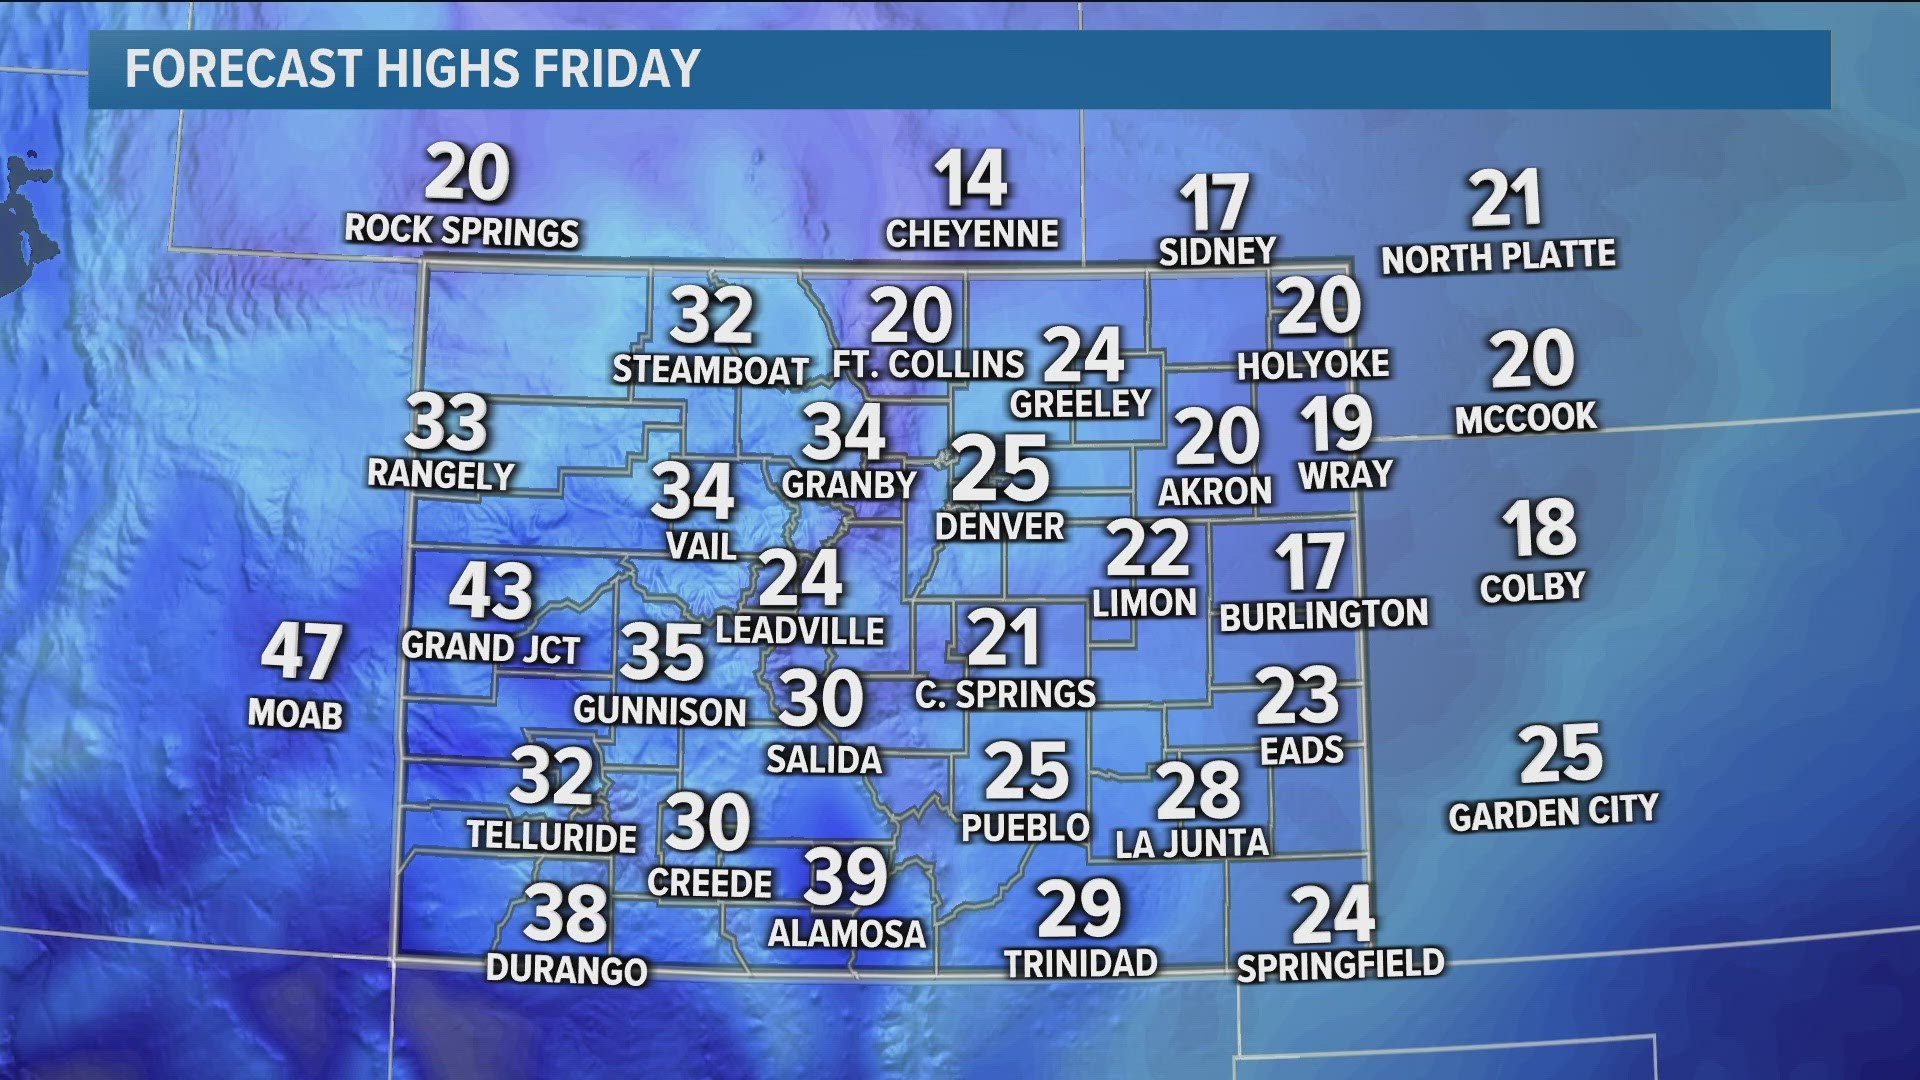 Light snow will continue Friday, and temperatures for Saturday morning could drop into the single digits.